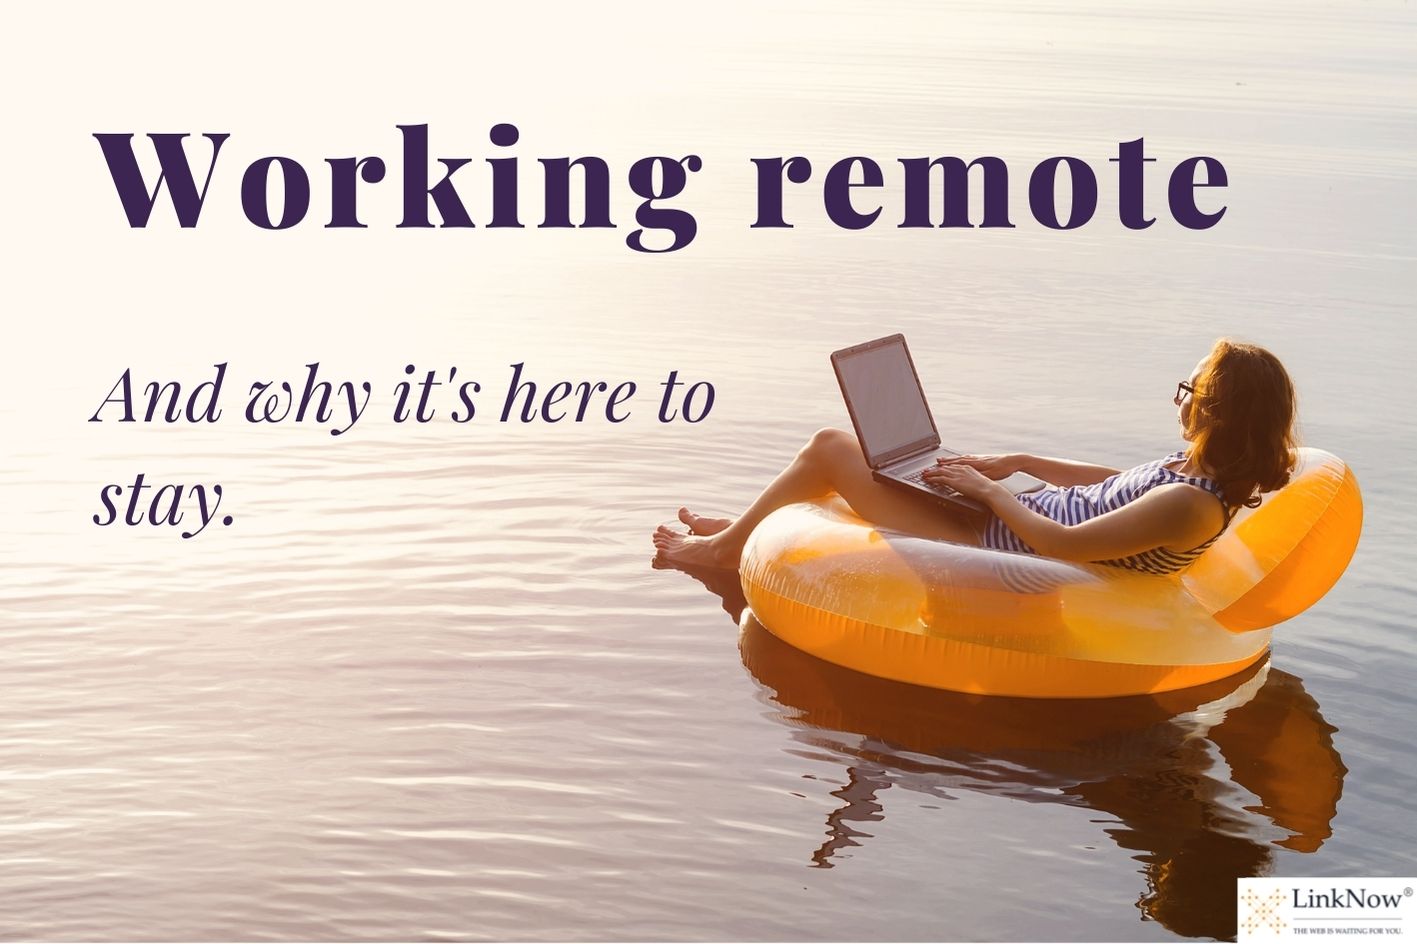 Woman in inflatable tube on water works on her laptop. Text says: Working remote, and why it's here to stay.